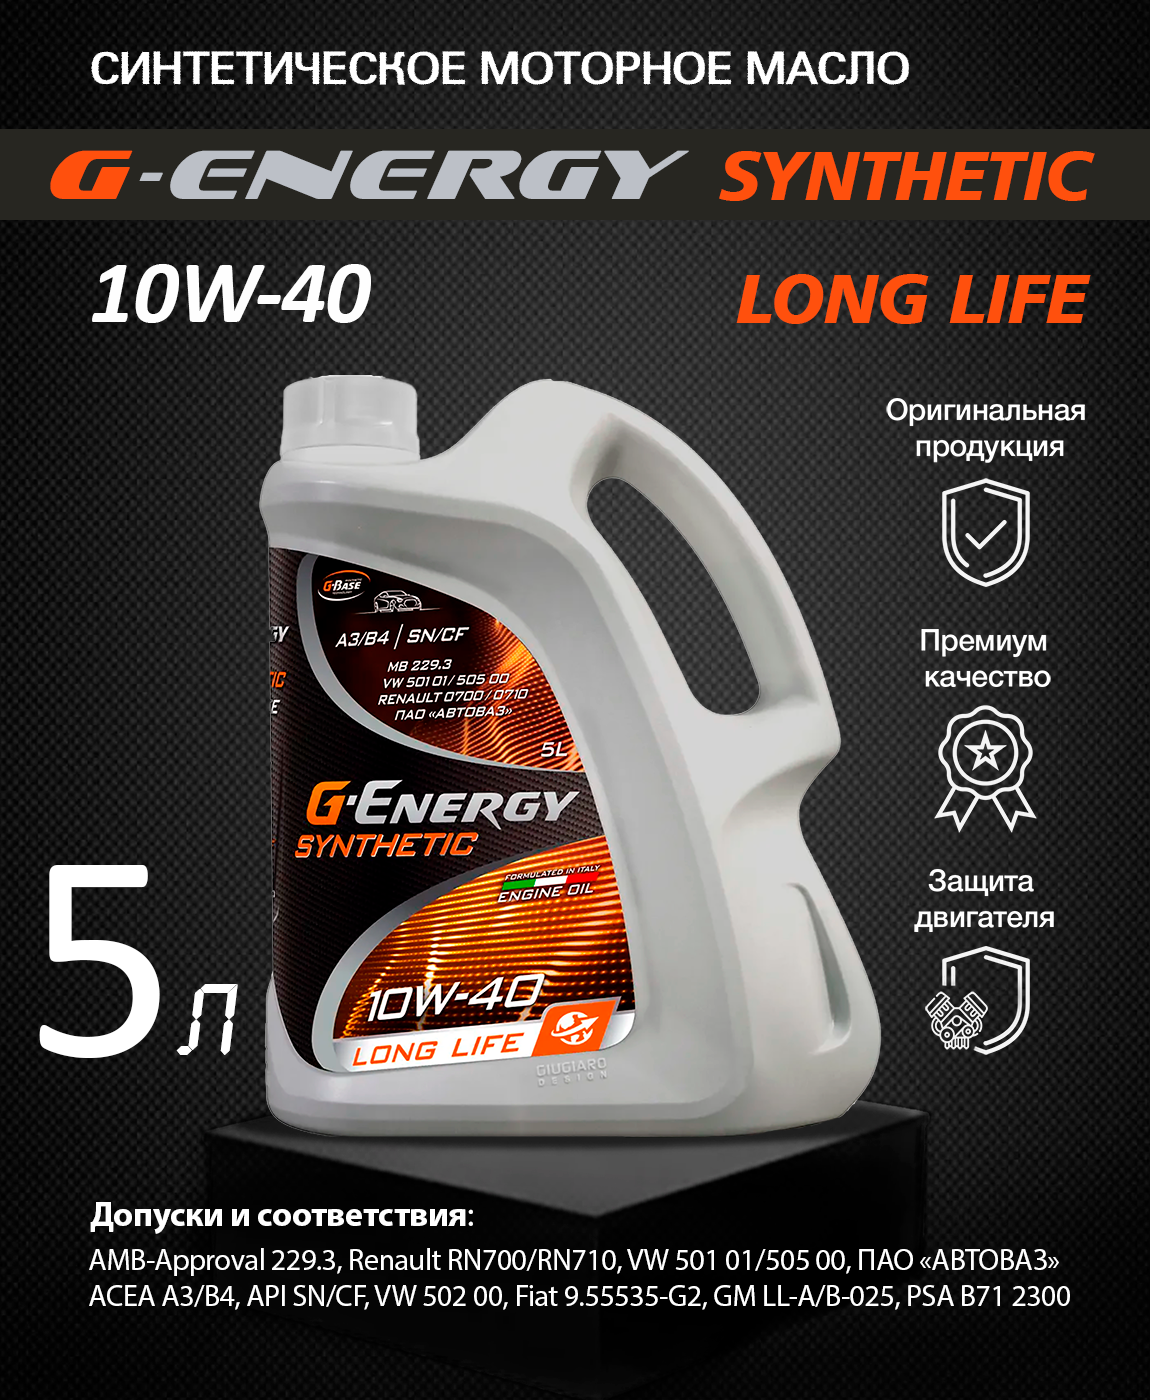 Масло g energy synthetic 5w 30. G-Energy Synthetic Active 5w-40. G-Energy Synthetic Active 5w-30. Масло g Energy 5w30 far East. Масло g Energy Synthetic Active 5w30.